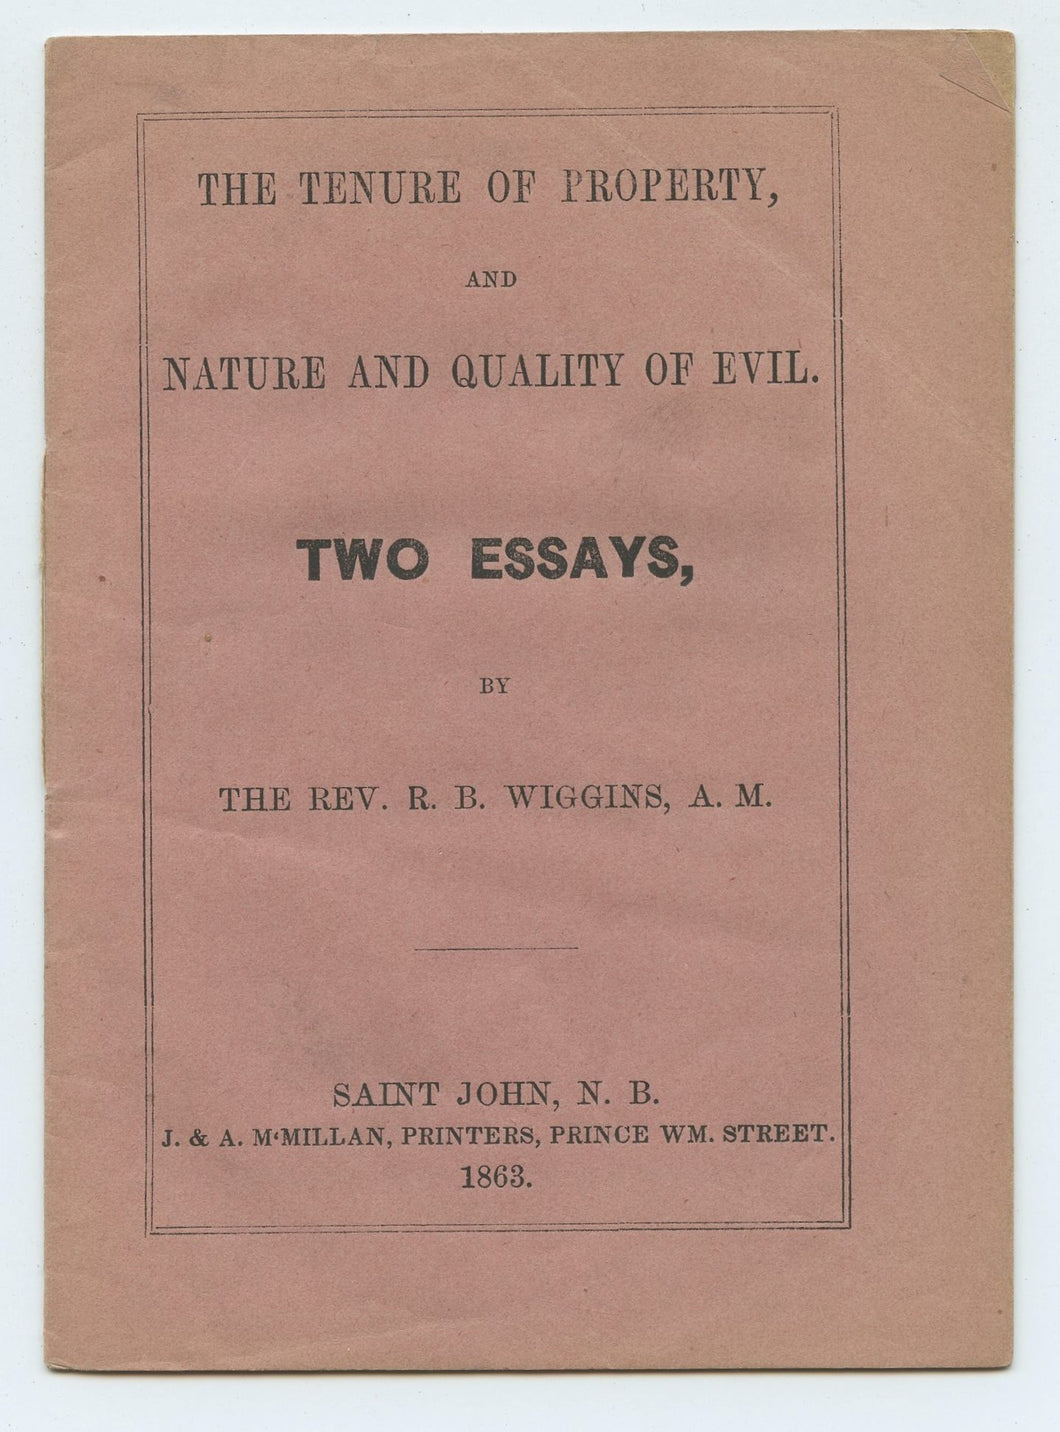 The Tenure of Property, and Nature and Quality of Evil. Two Essays by The Rev. R. B. Wiggins, A.M.